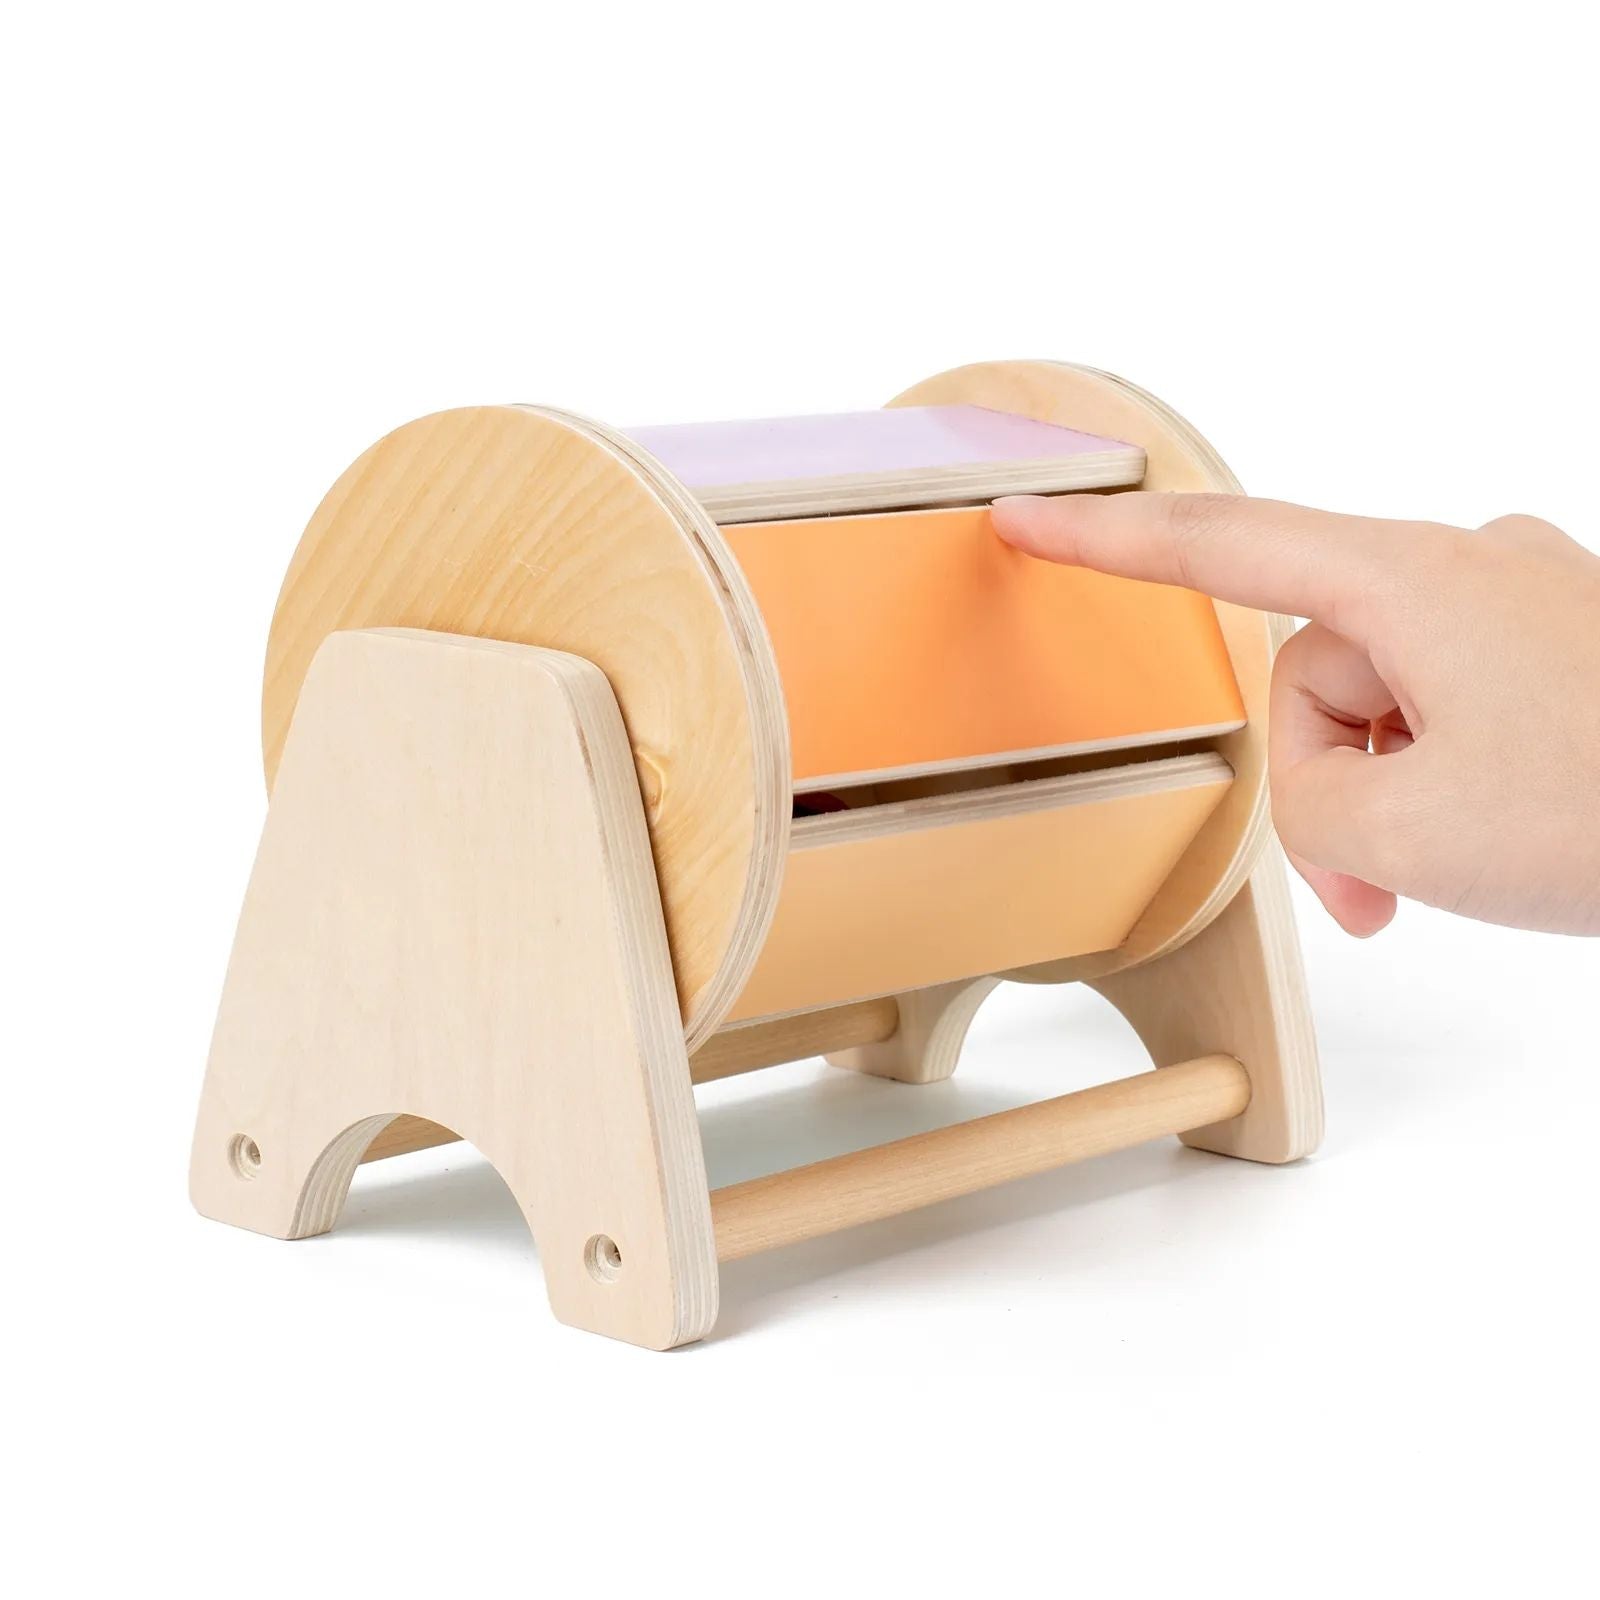 A hand pressing a button on a wooden InvenToy Montessori Spinning Drum baby toy, on a white background.